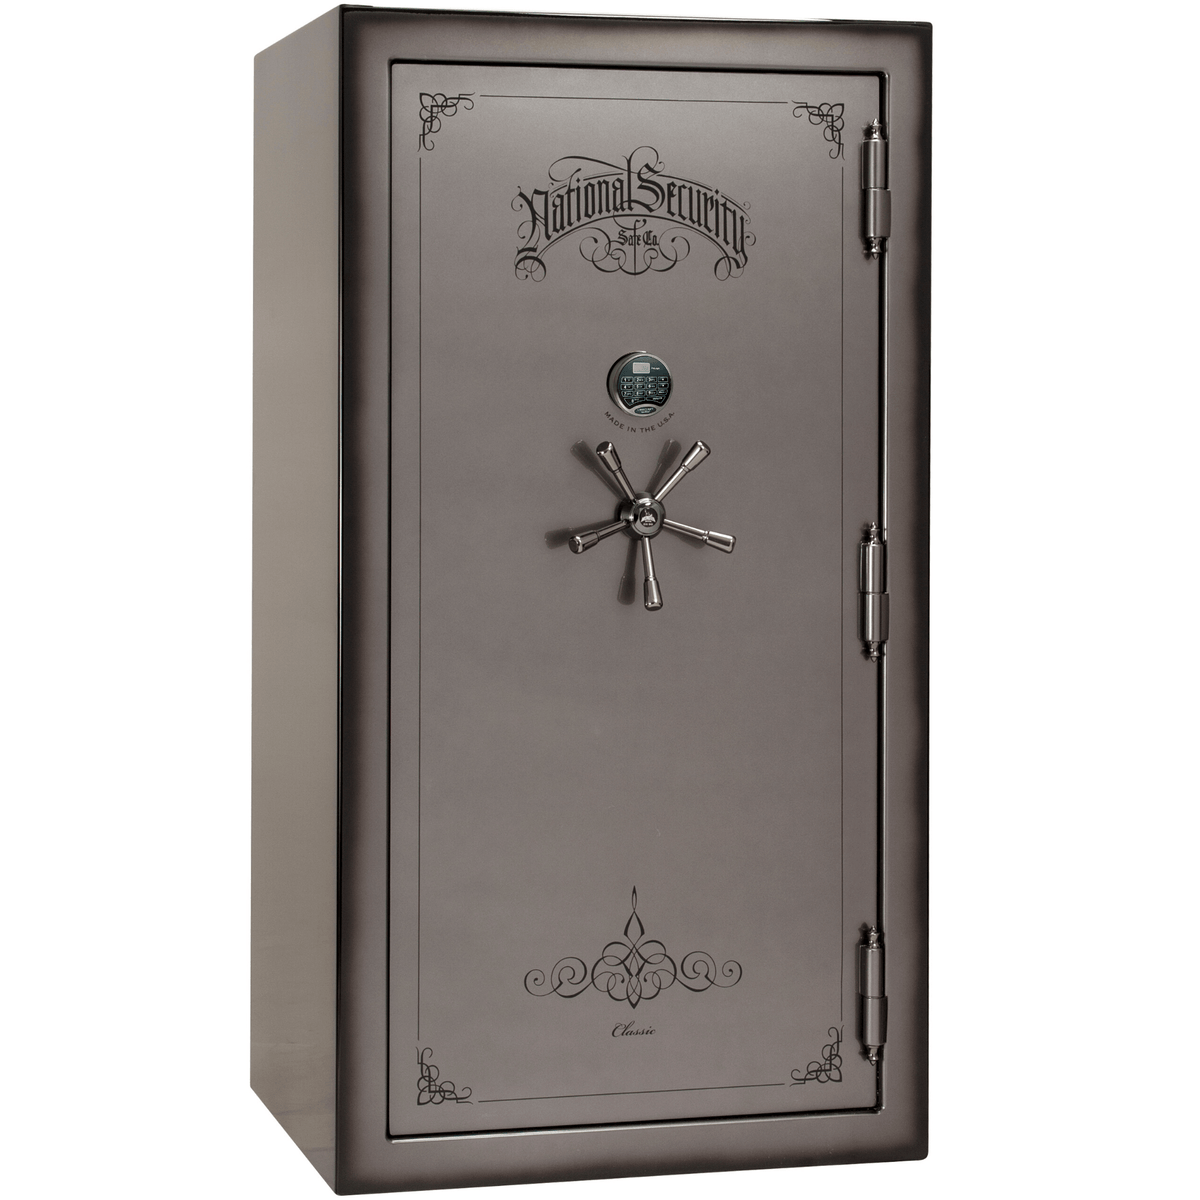 Liberty Safe Classic Plus 40 in Feathered Gray Gloss with Black Chrome Electronic Lock, closed door.